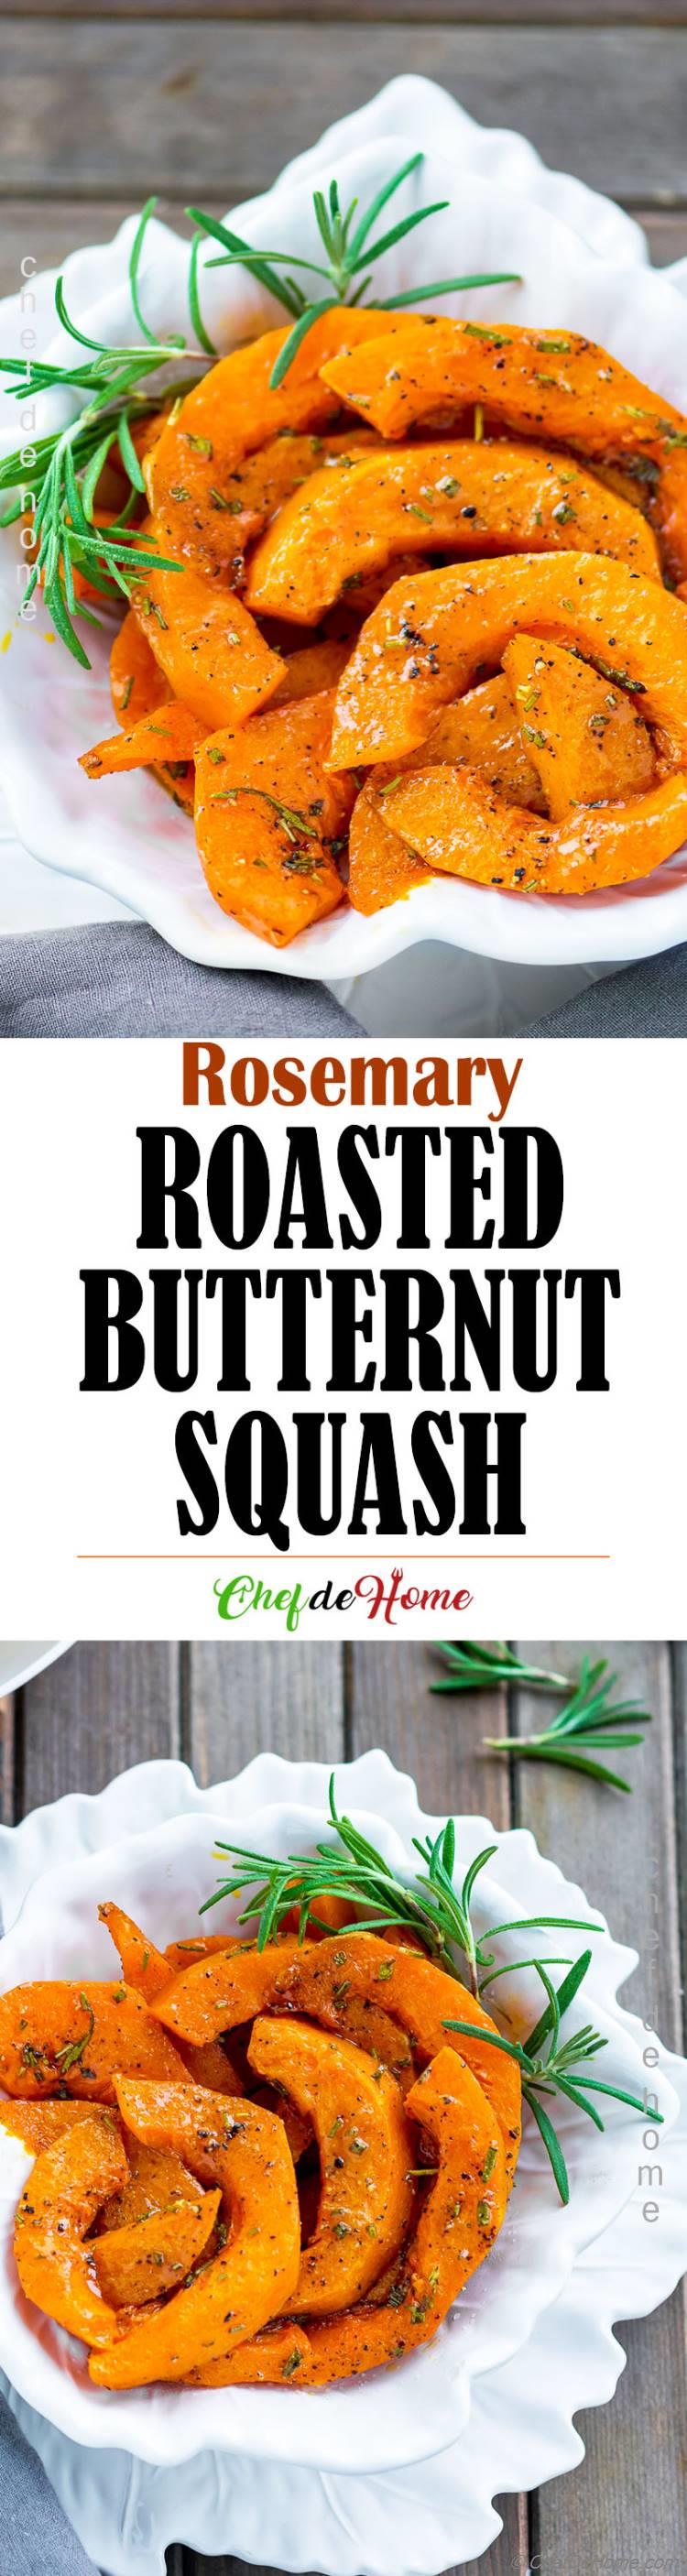 Herbs Rosemary Butternut Squash for Thanksgiving Sides